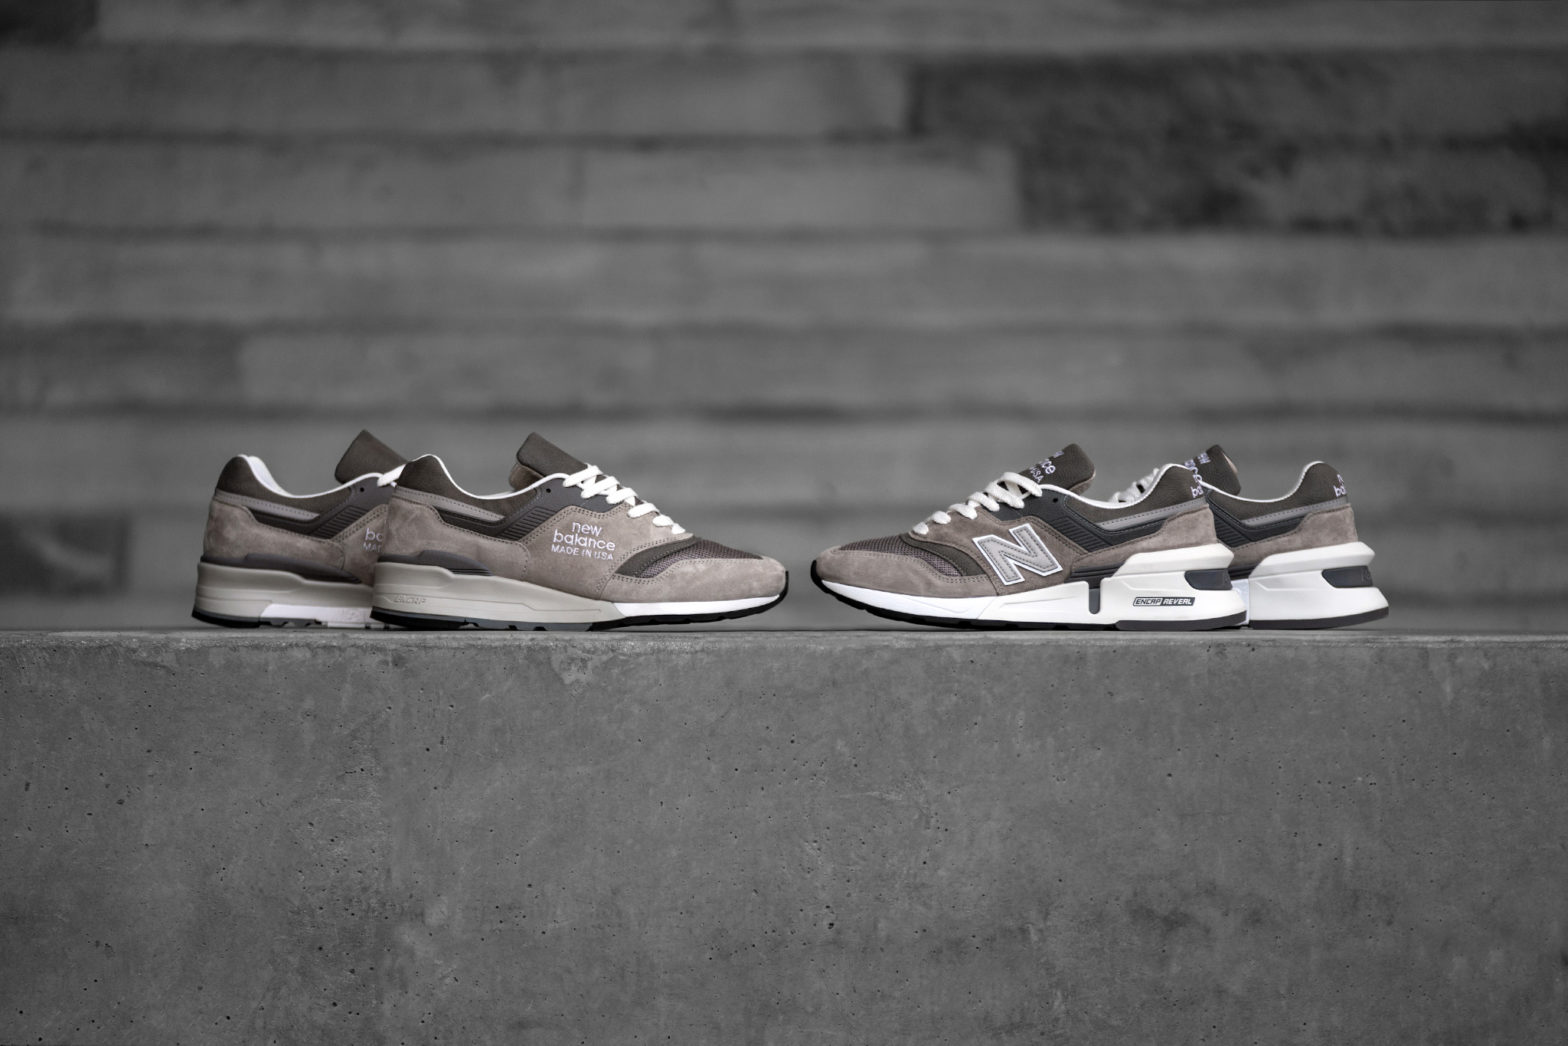 new balance M997 “made in U.S.A.” “GREY DAY” “GREY RUNS IN THE 